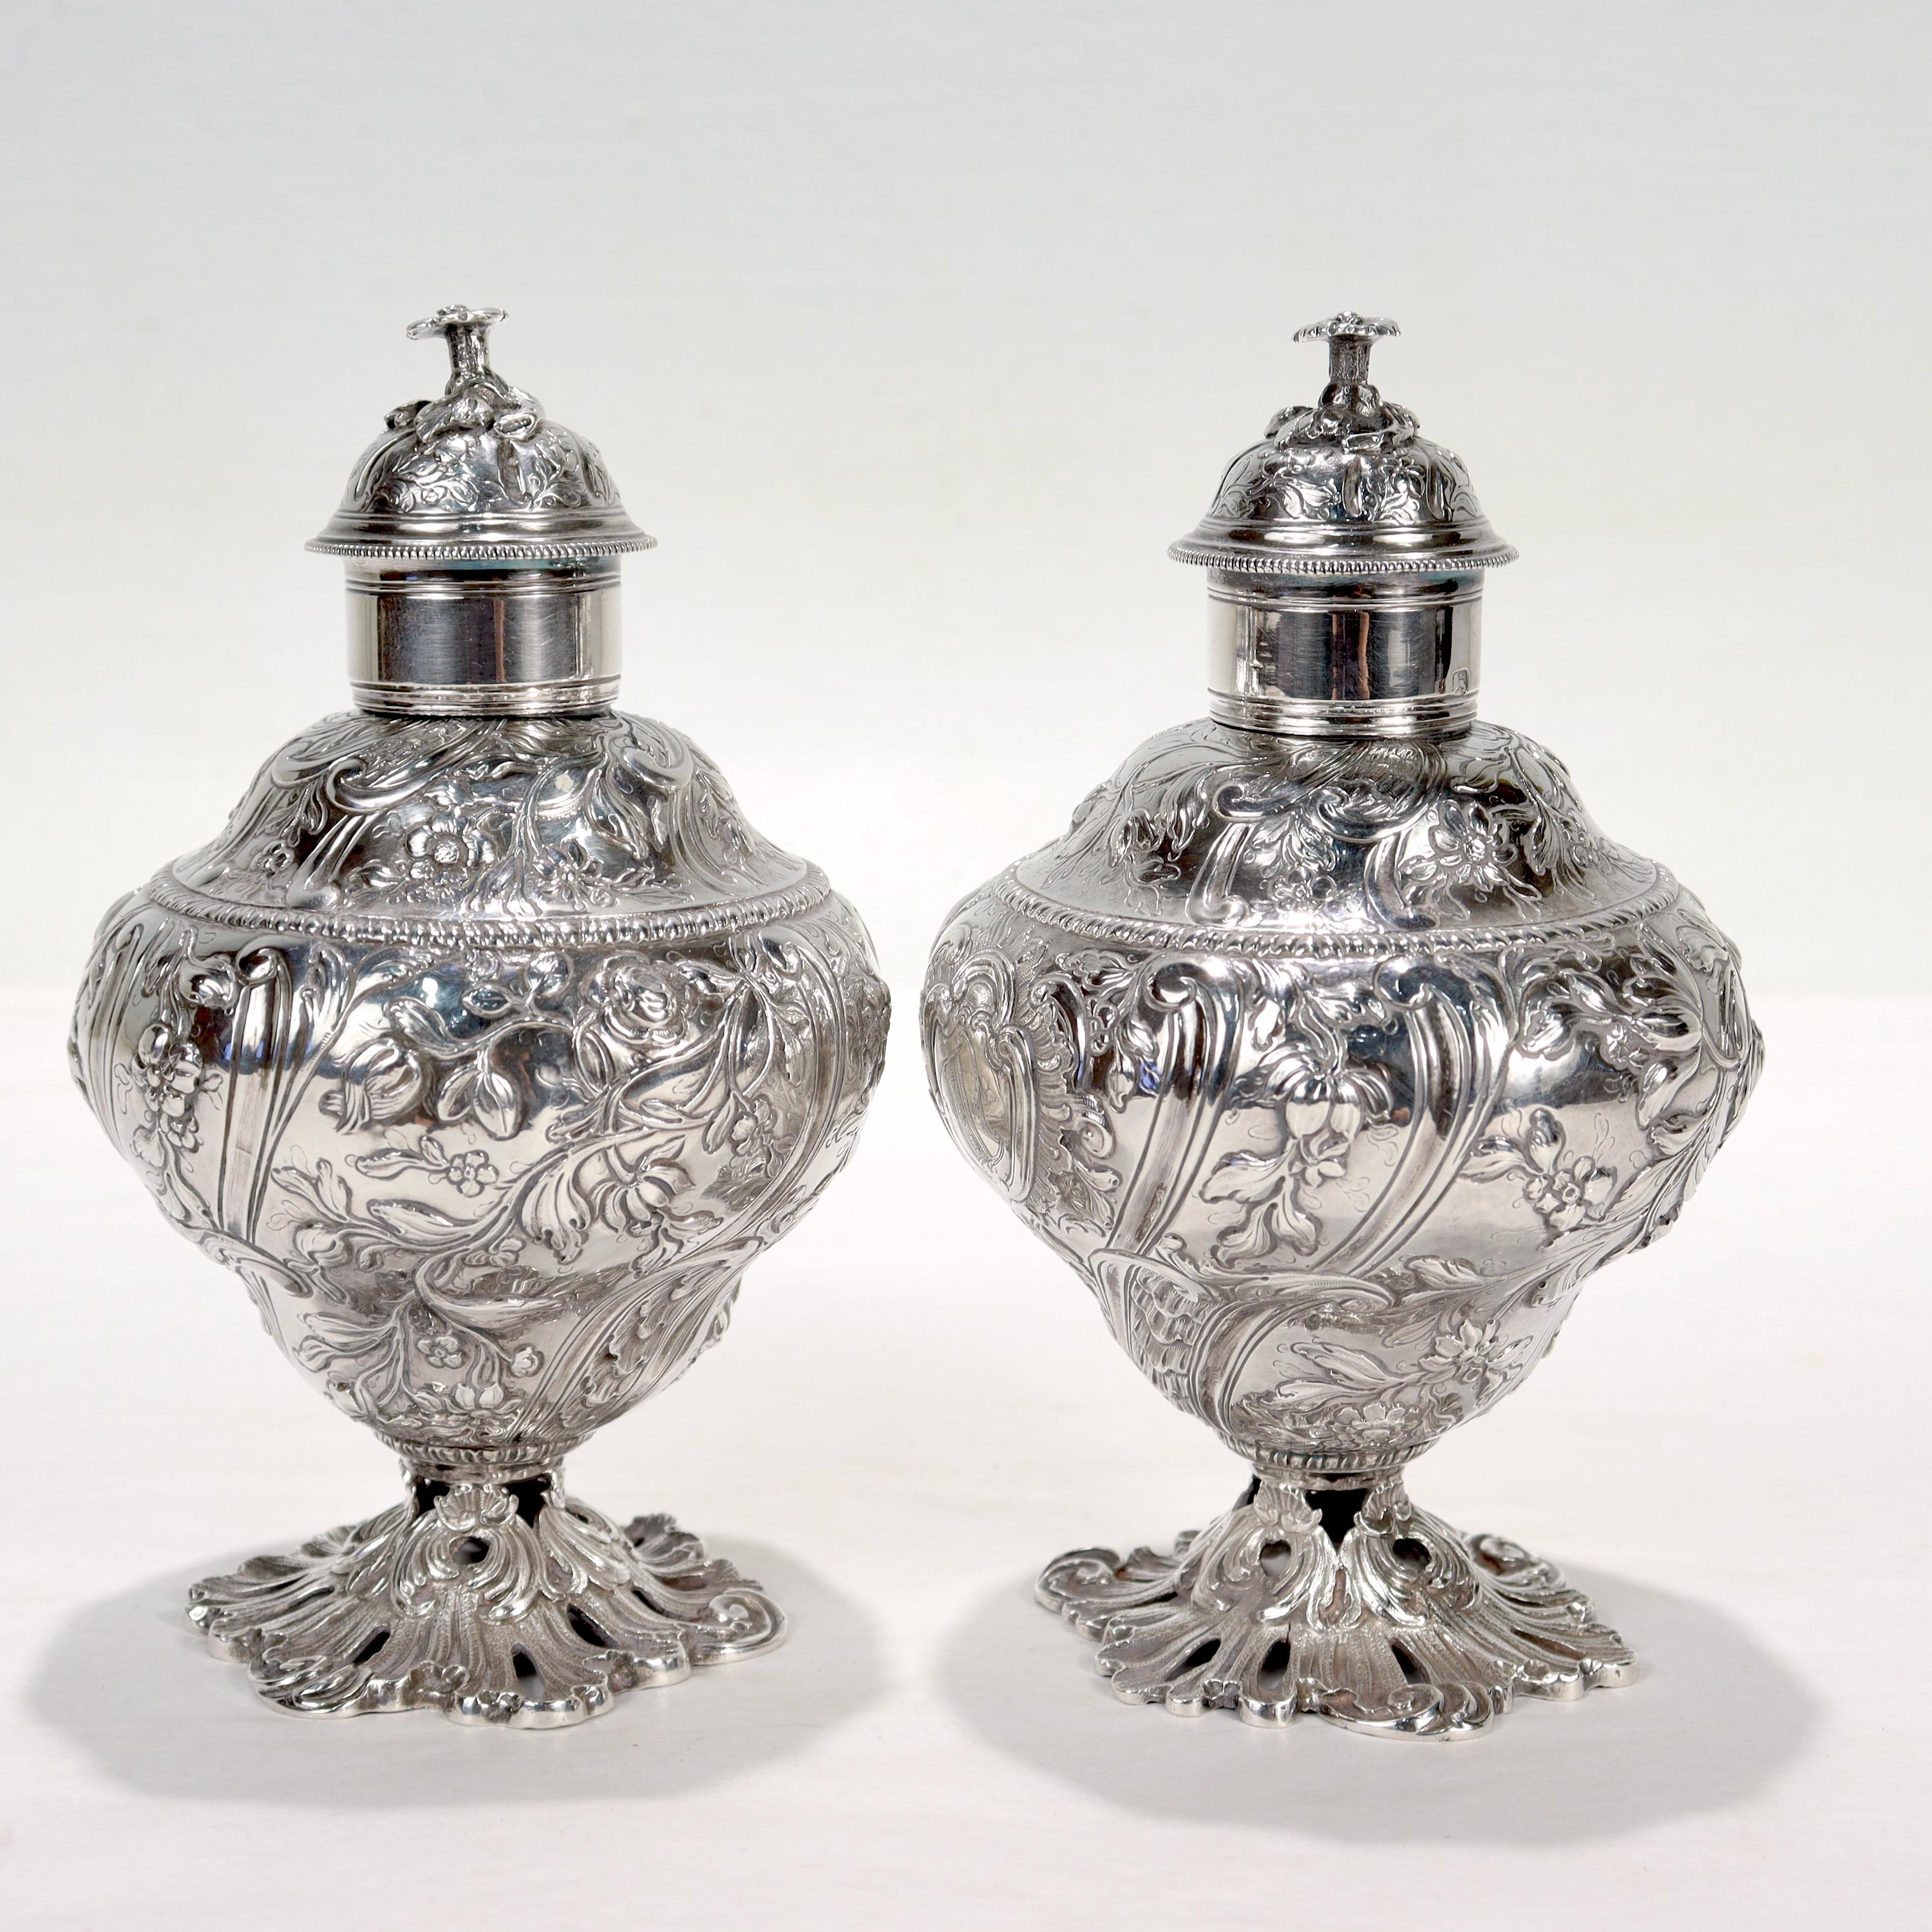 Pair of Antique Georgian English Sterling Silver Tea Caddies by Francis Crump In Good Condition For Sale In Philadelphia, PA